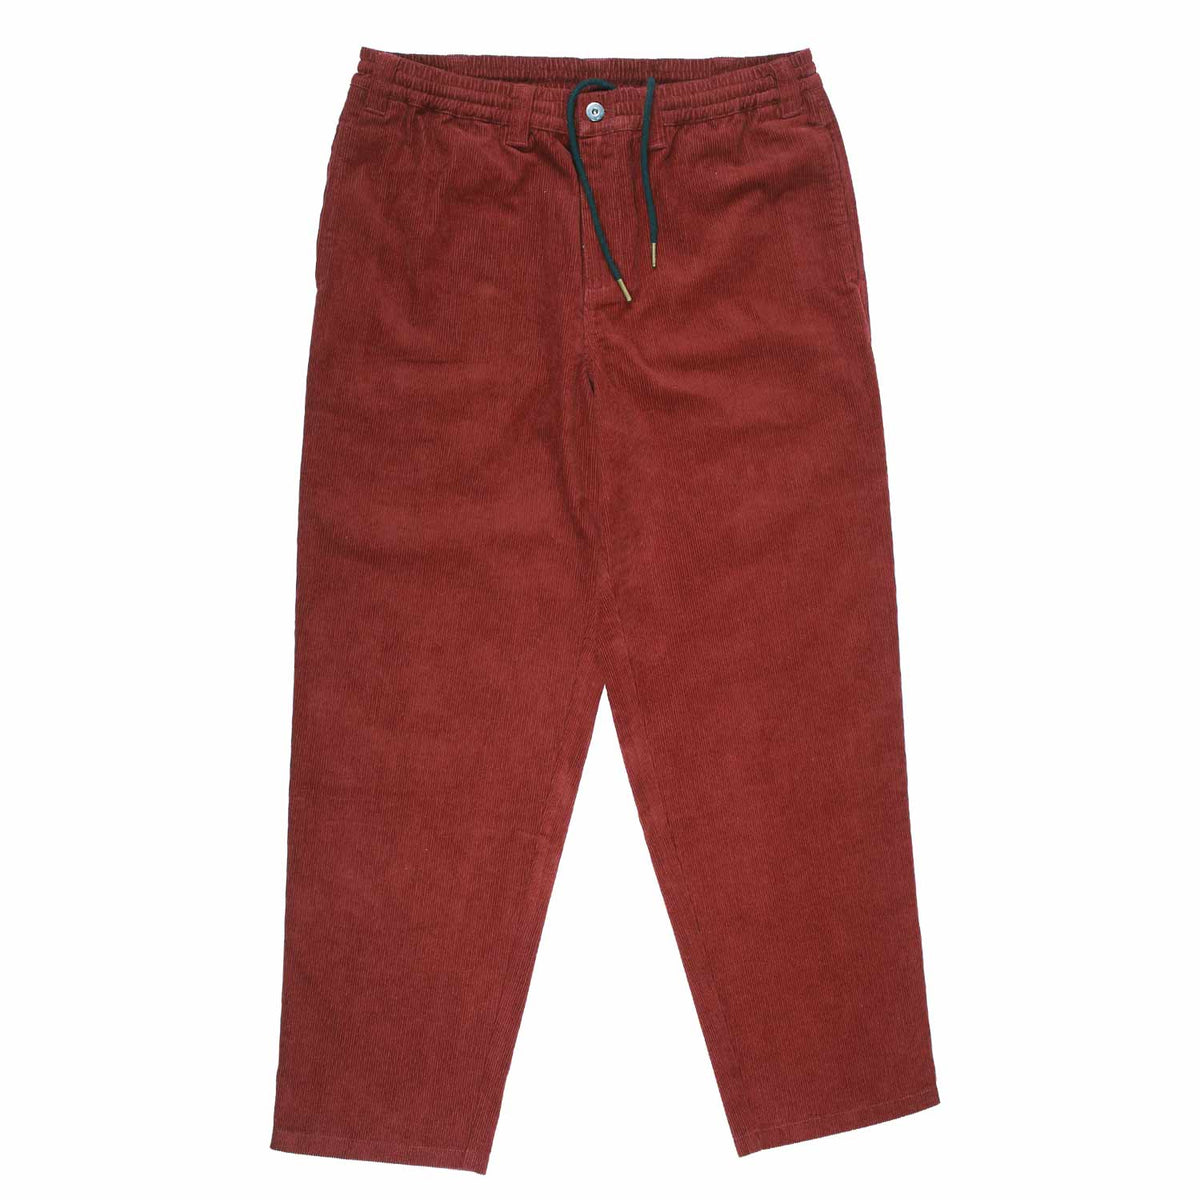 Theories Stamp Lounge Pants Corduroy Burgundy Front